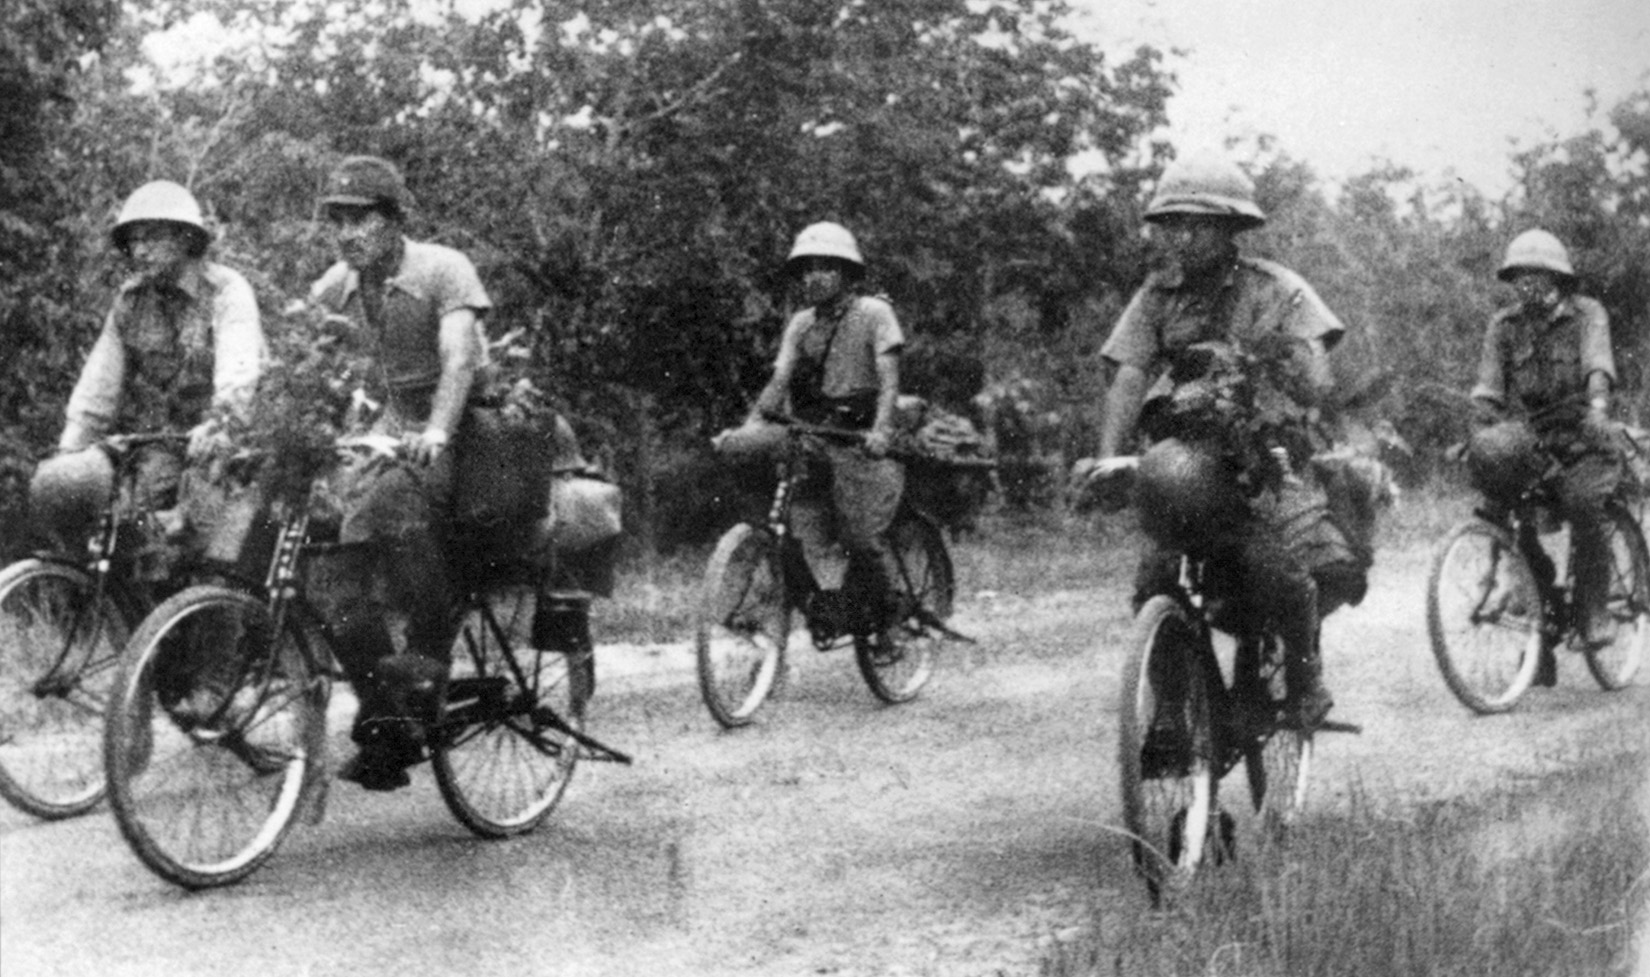 The invading Japanese took advantage of bicycles, a reliable form of transportation along jungle roads and trails. When the rubber tires went flat, the soldiers simply kept riding on the metal rims.  